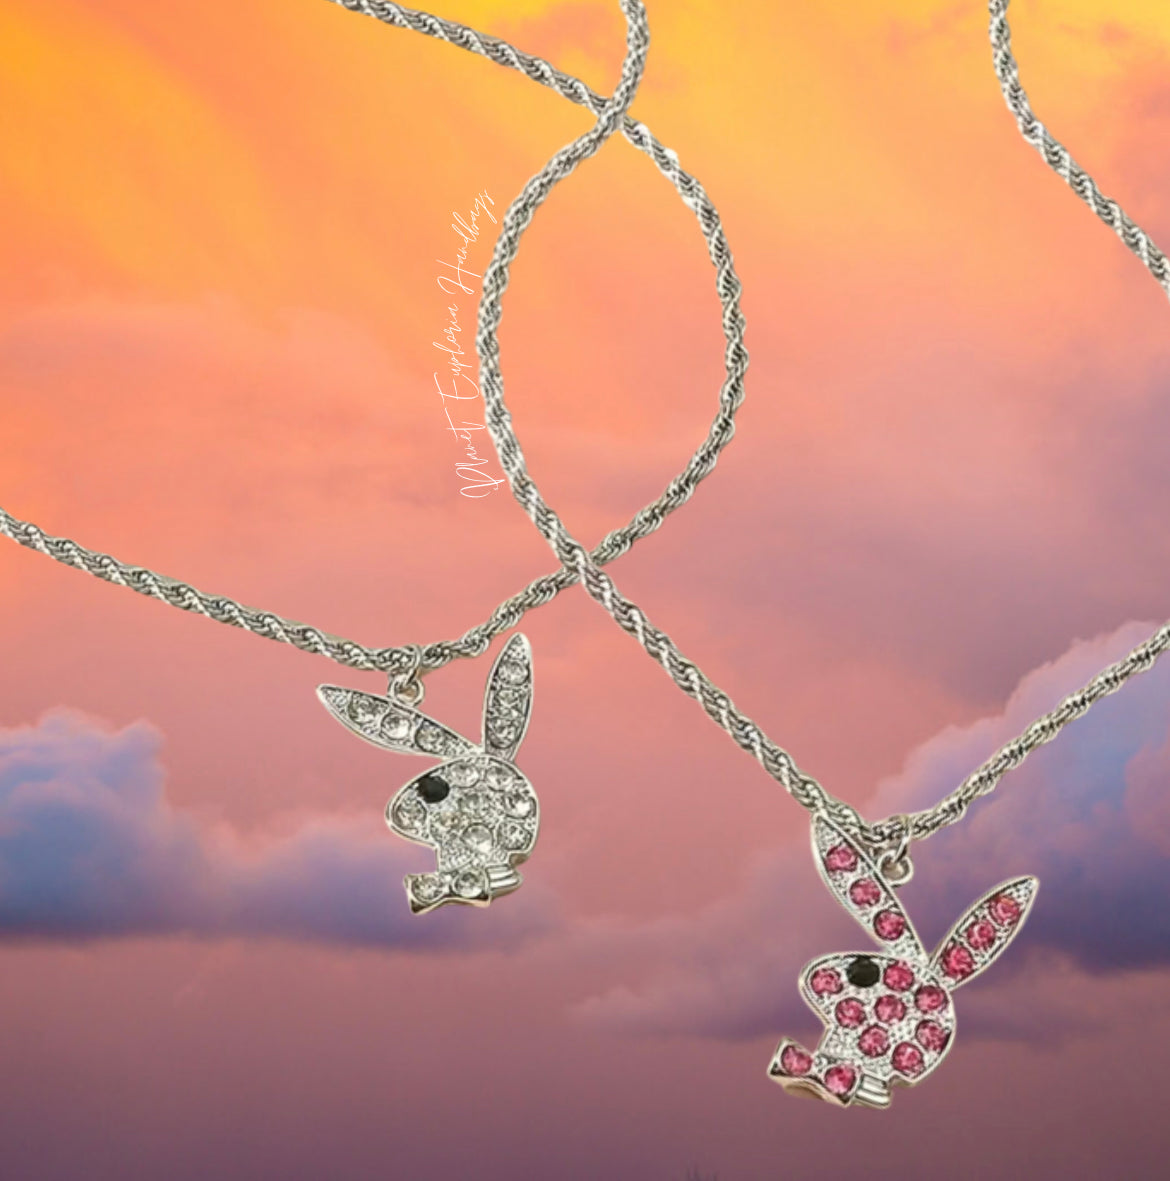 Bunny Bling Charm Necklaces